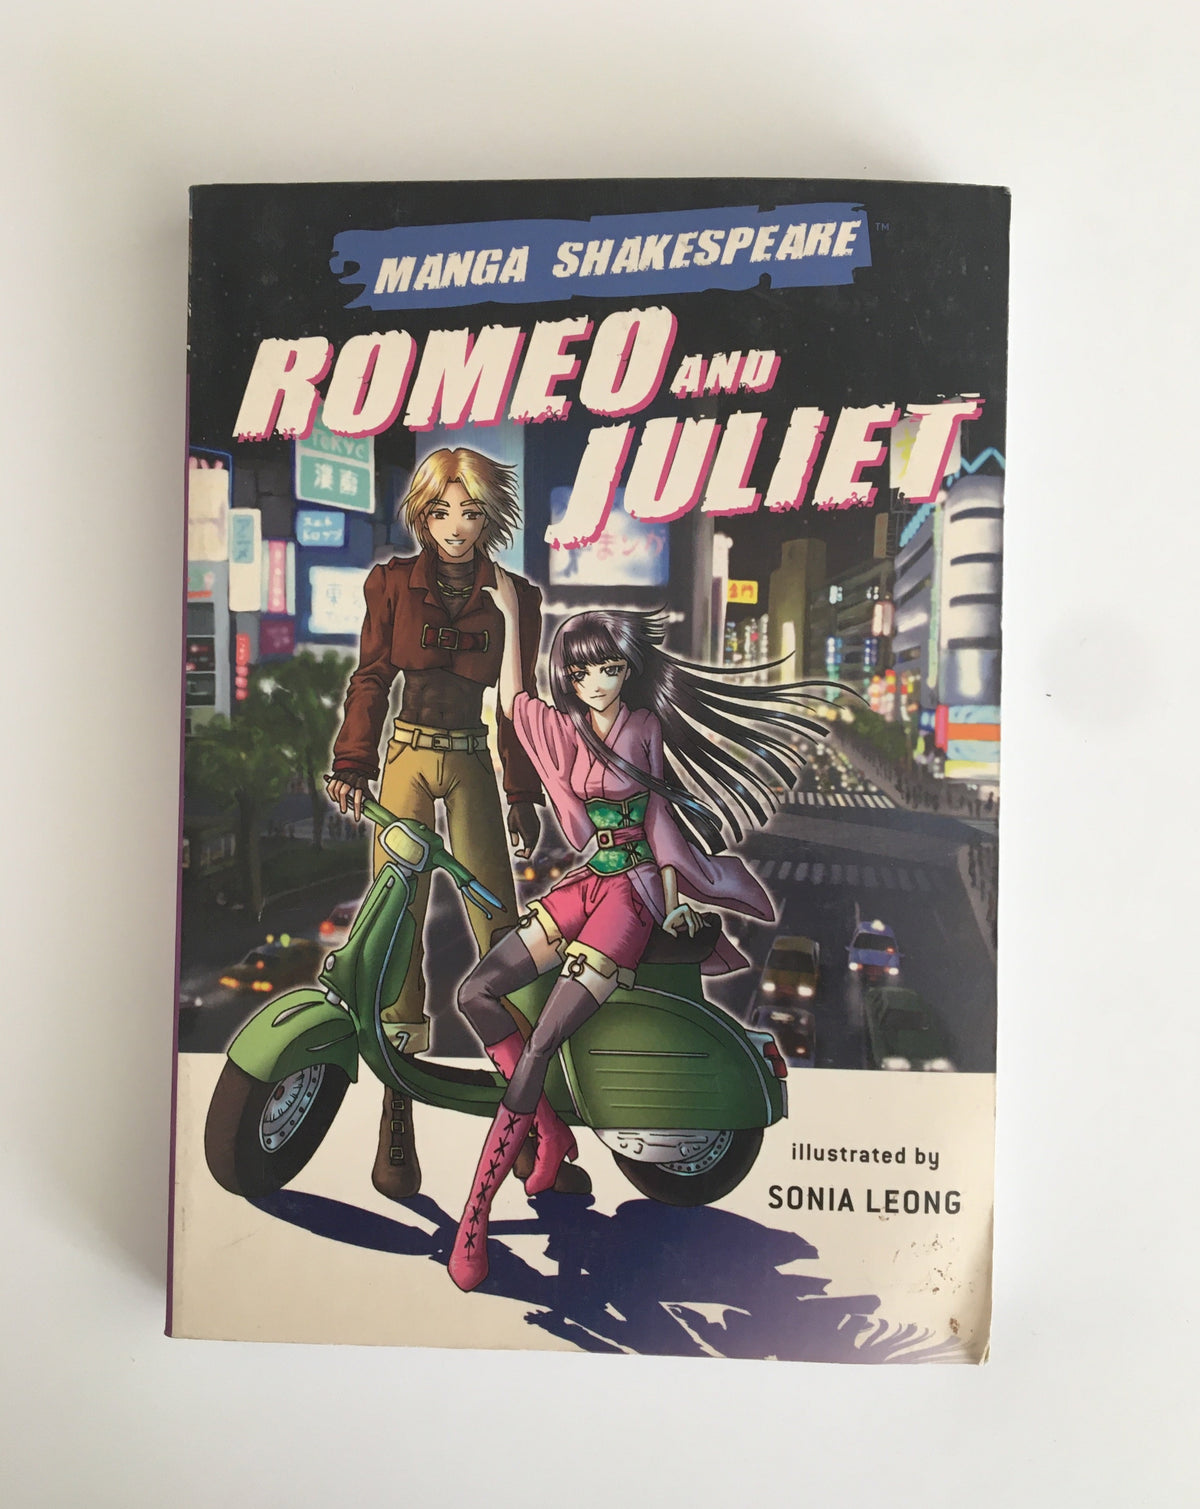 Manga Shakespeare: Romeo and Juliet illustrated by Sonia Leong